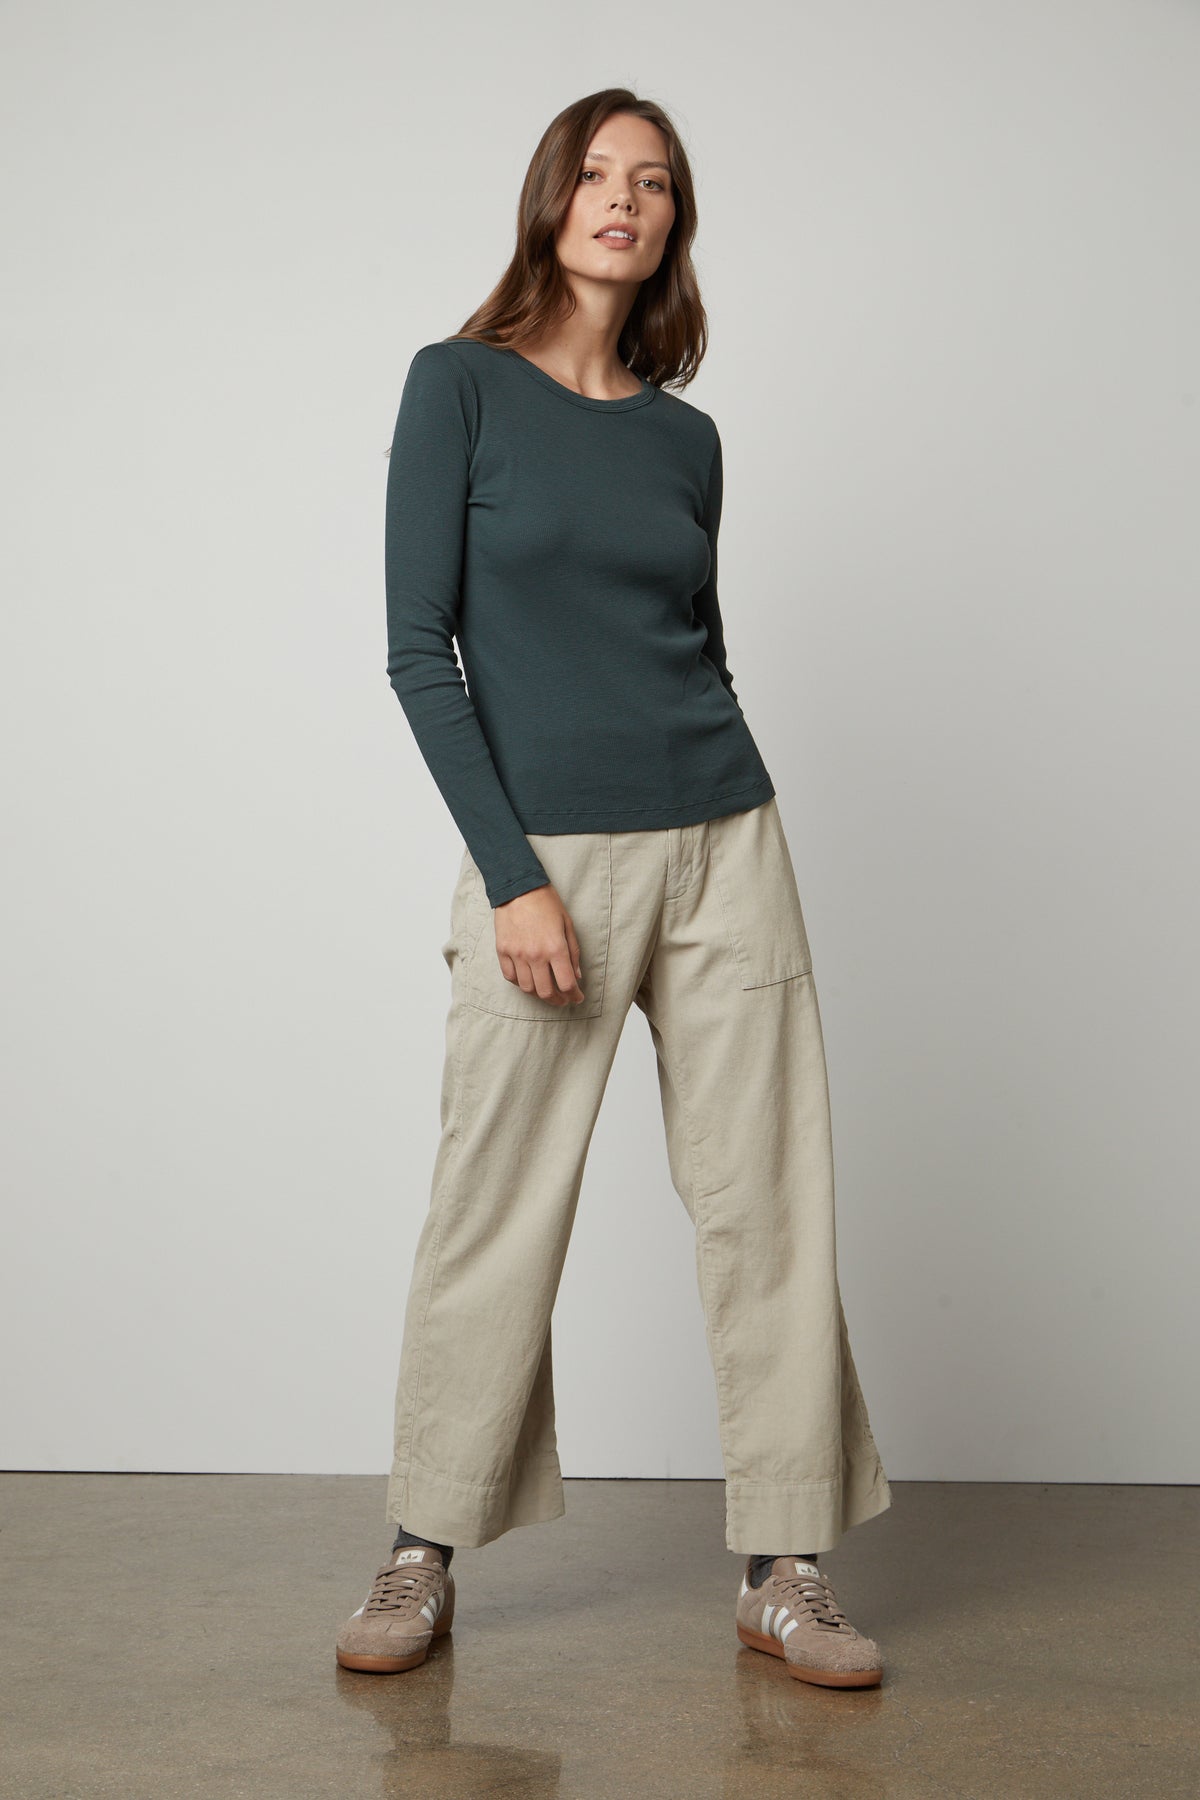 The model is wearing a Velvet by Graham & Spencer BAYLER RIBBED SCOOP NECK TEE and khaki pants.-35206768459969